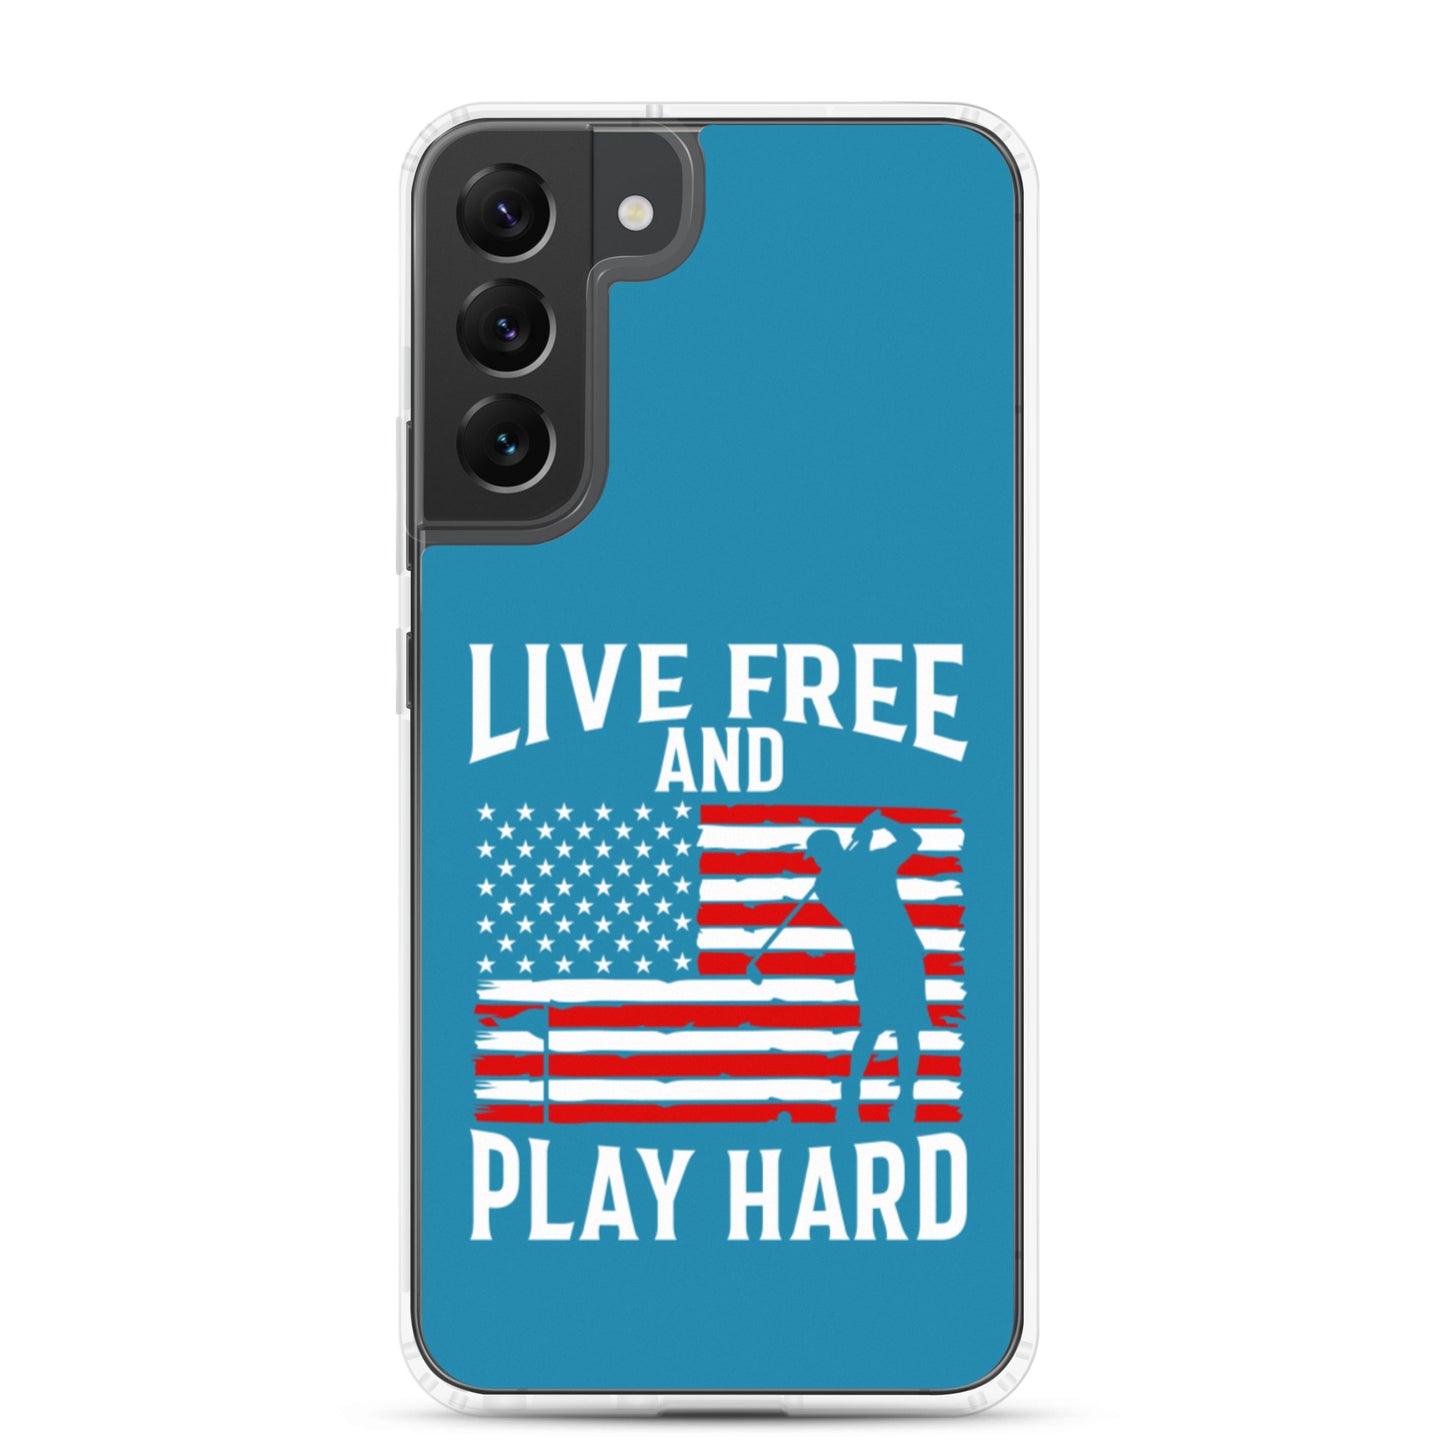 Live Free and Play Hard Samsung Case